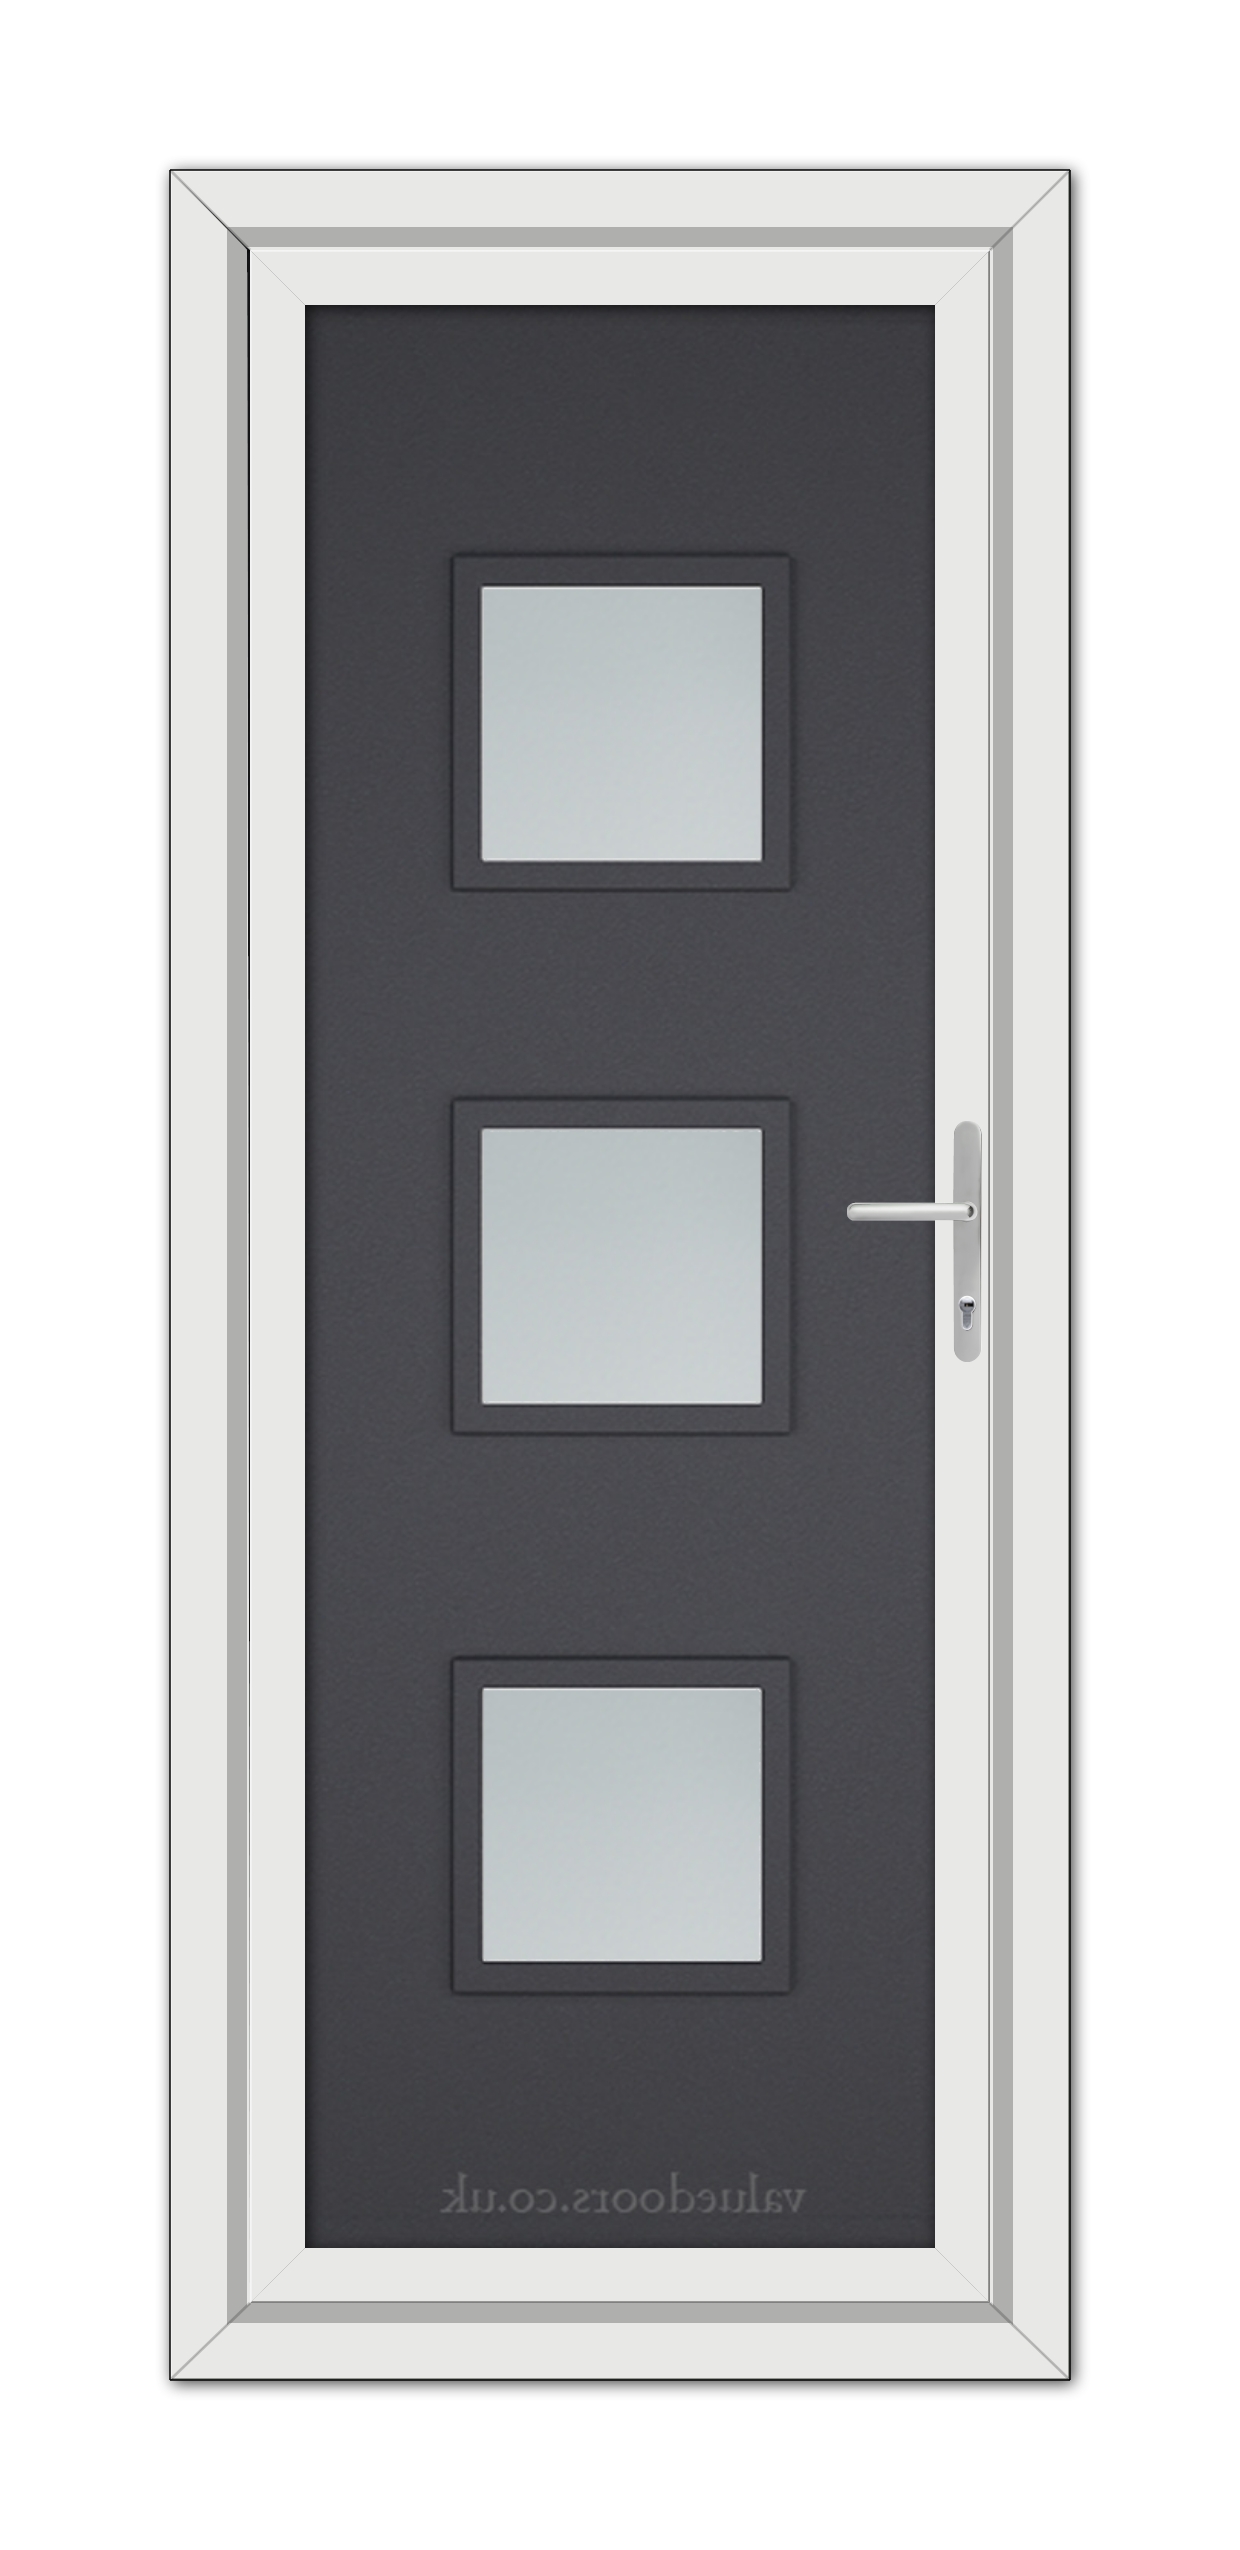 Grey Grained Modern 5013 uPVC Door with a white frame, featuring three rectangular frosted glass windows and a silver handle.